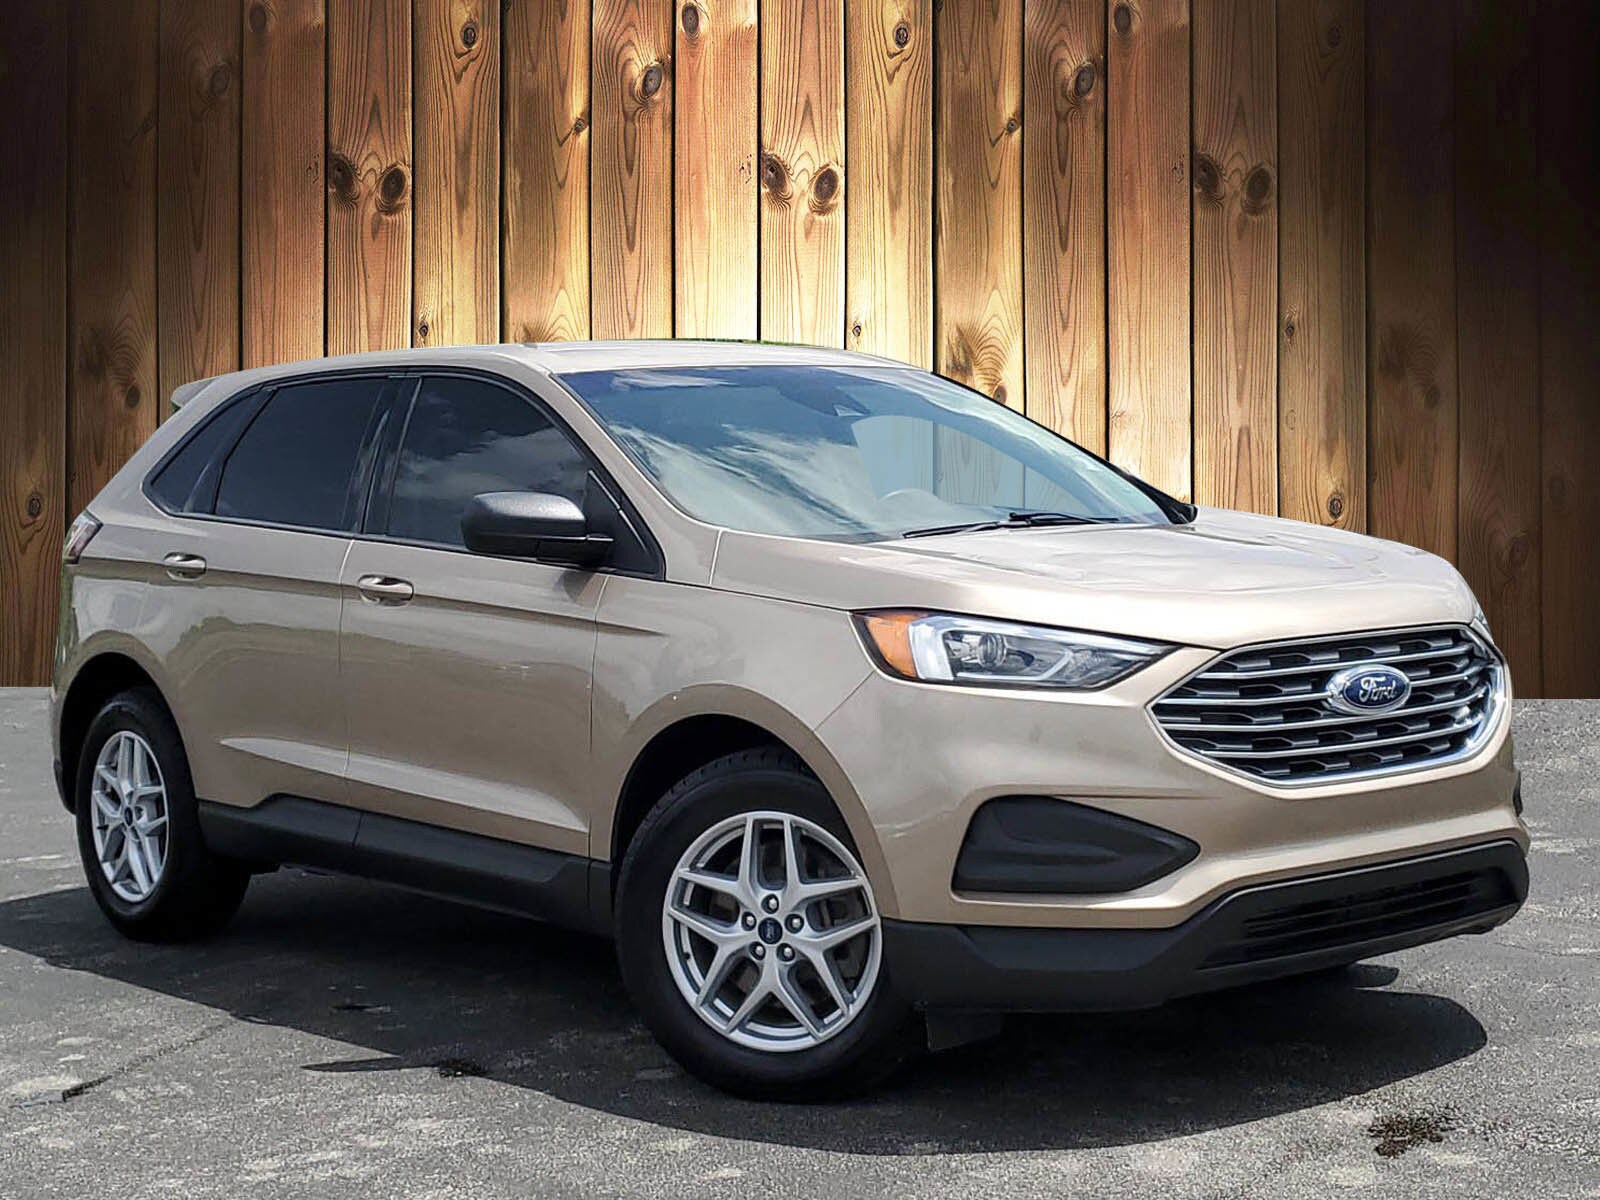 Used Ford Edge Tampa Fl